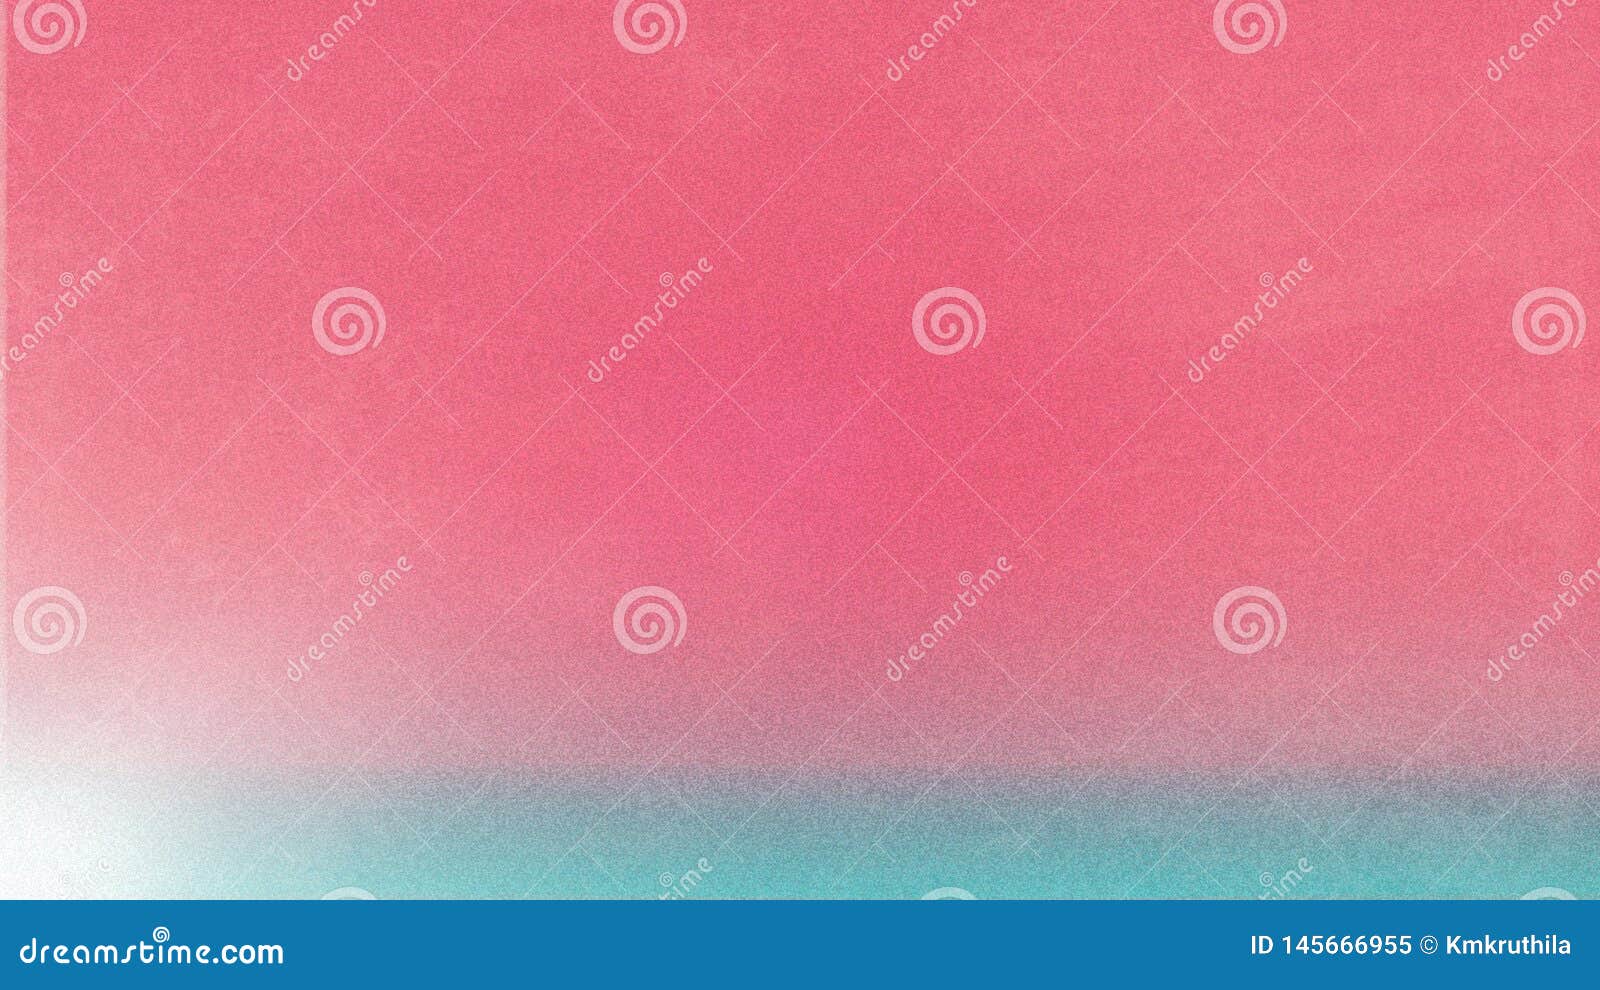 pink red material property beautiful elegant  graphic art  background